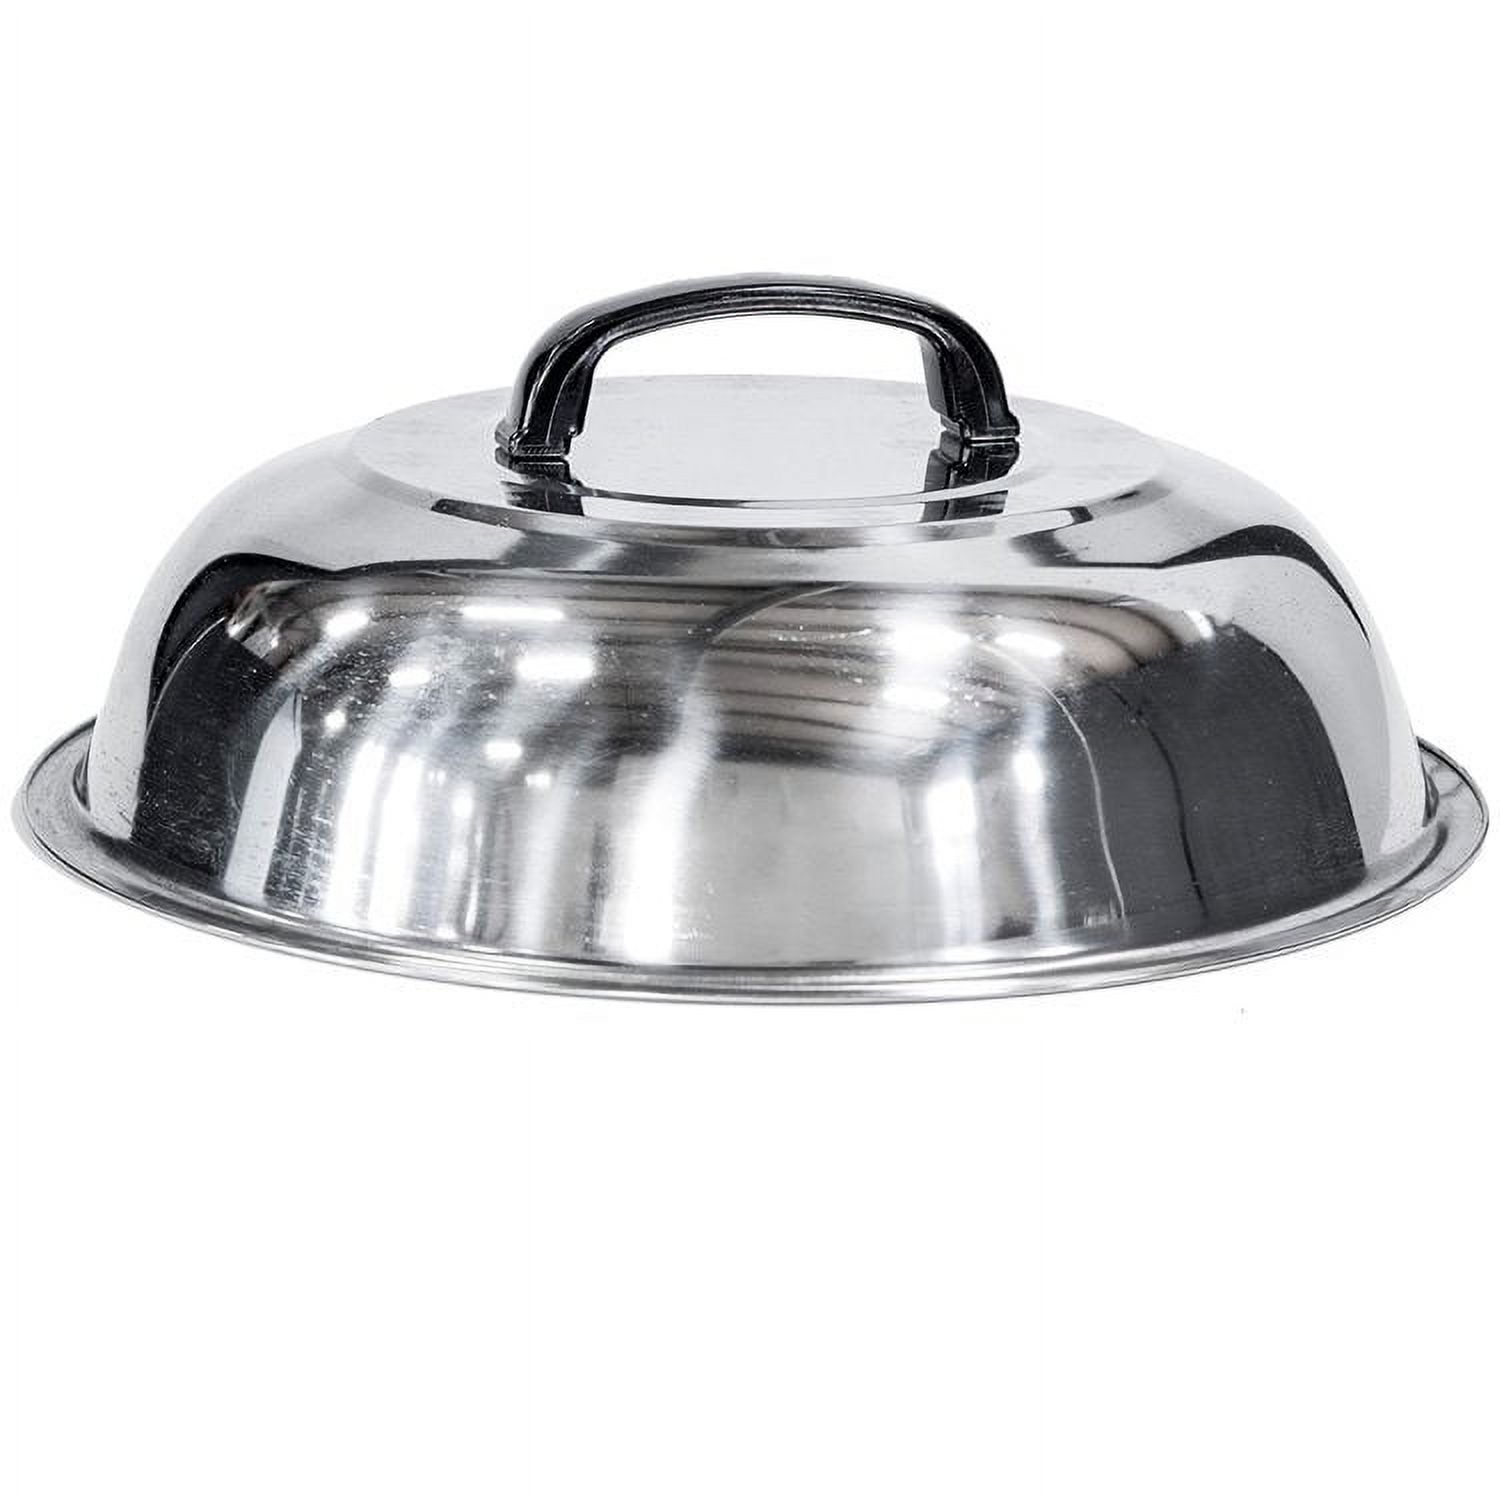 Blackstone 12" Round Basting/Melting/Steaming Cover, Stainless Steel - image 1 of 4